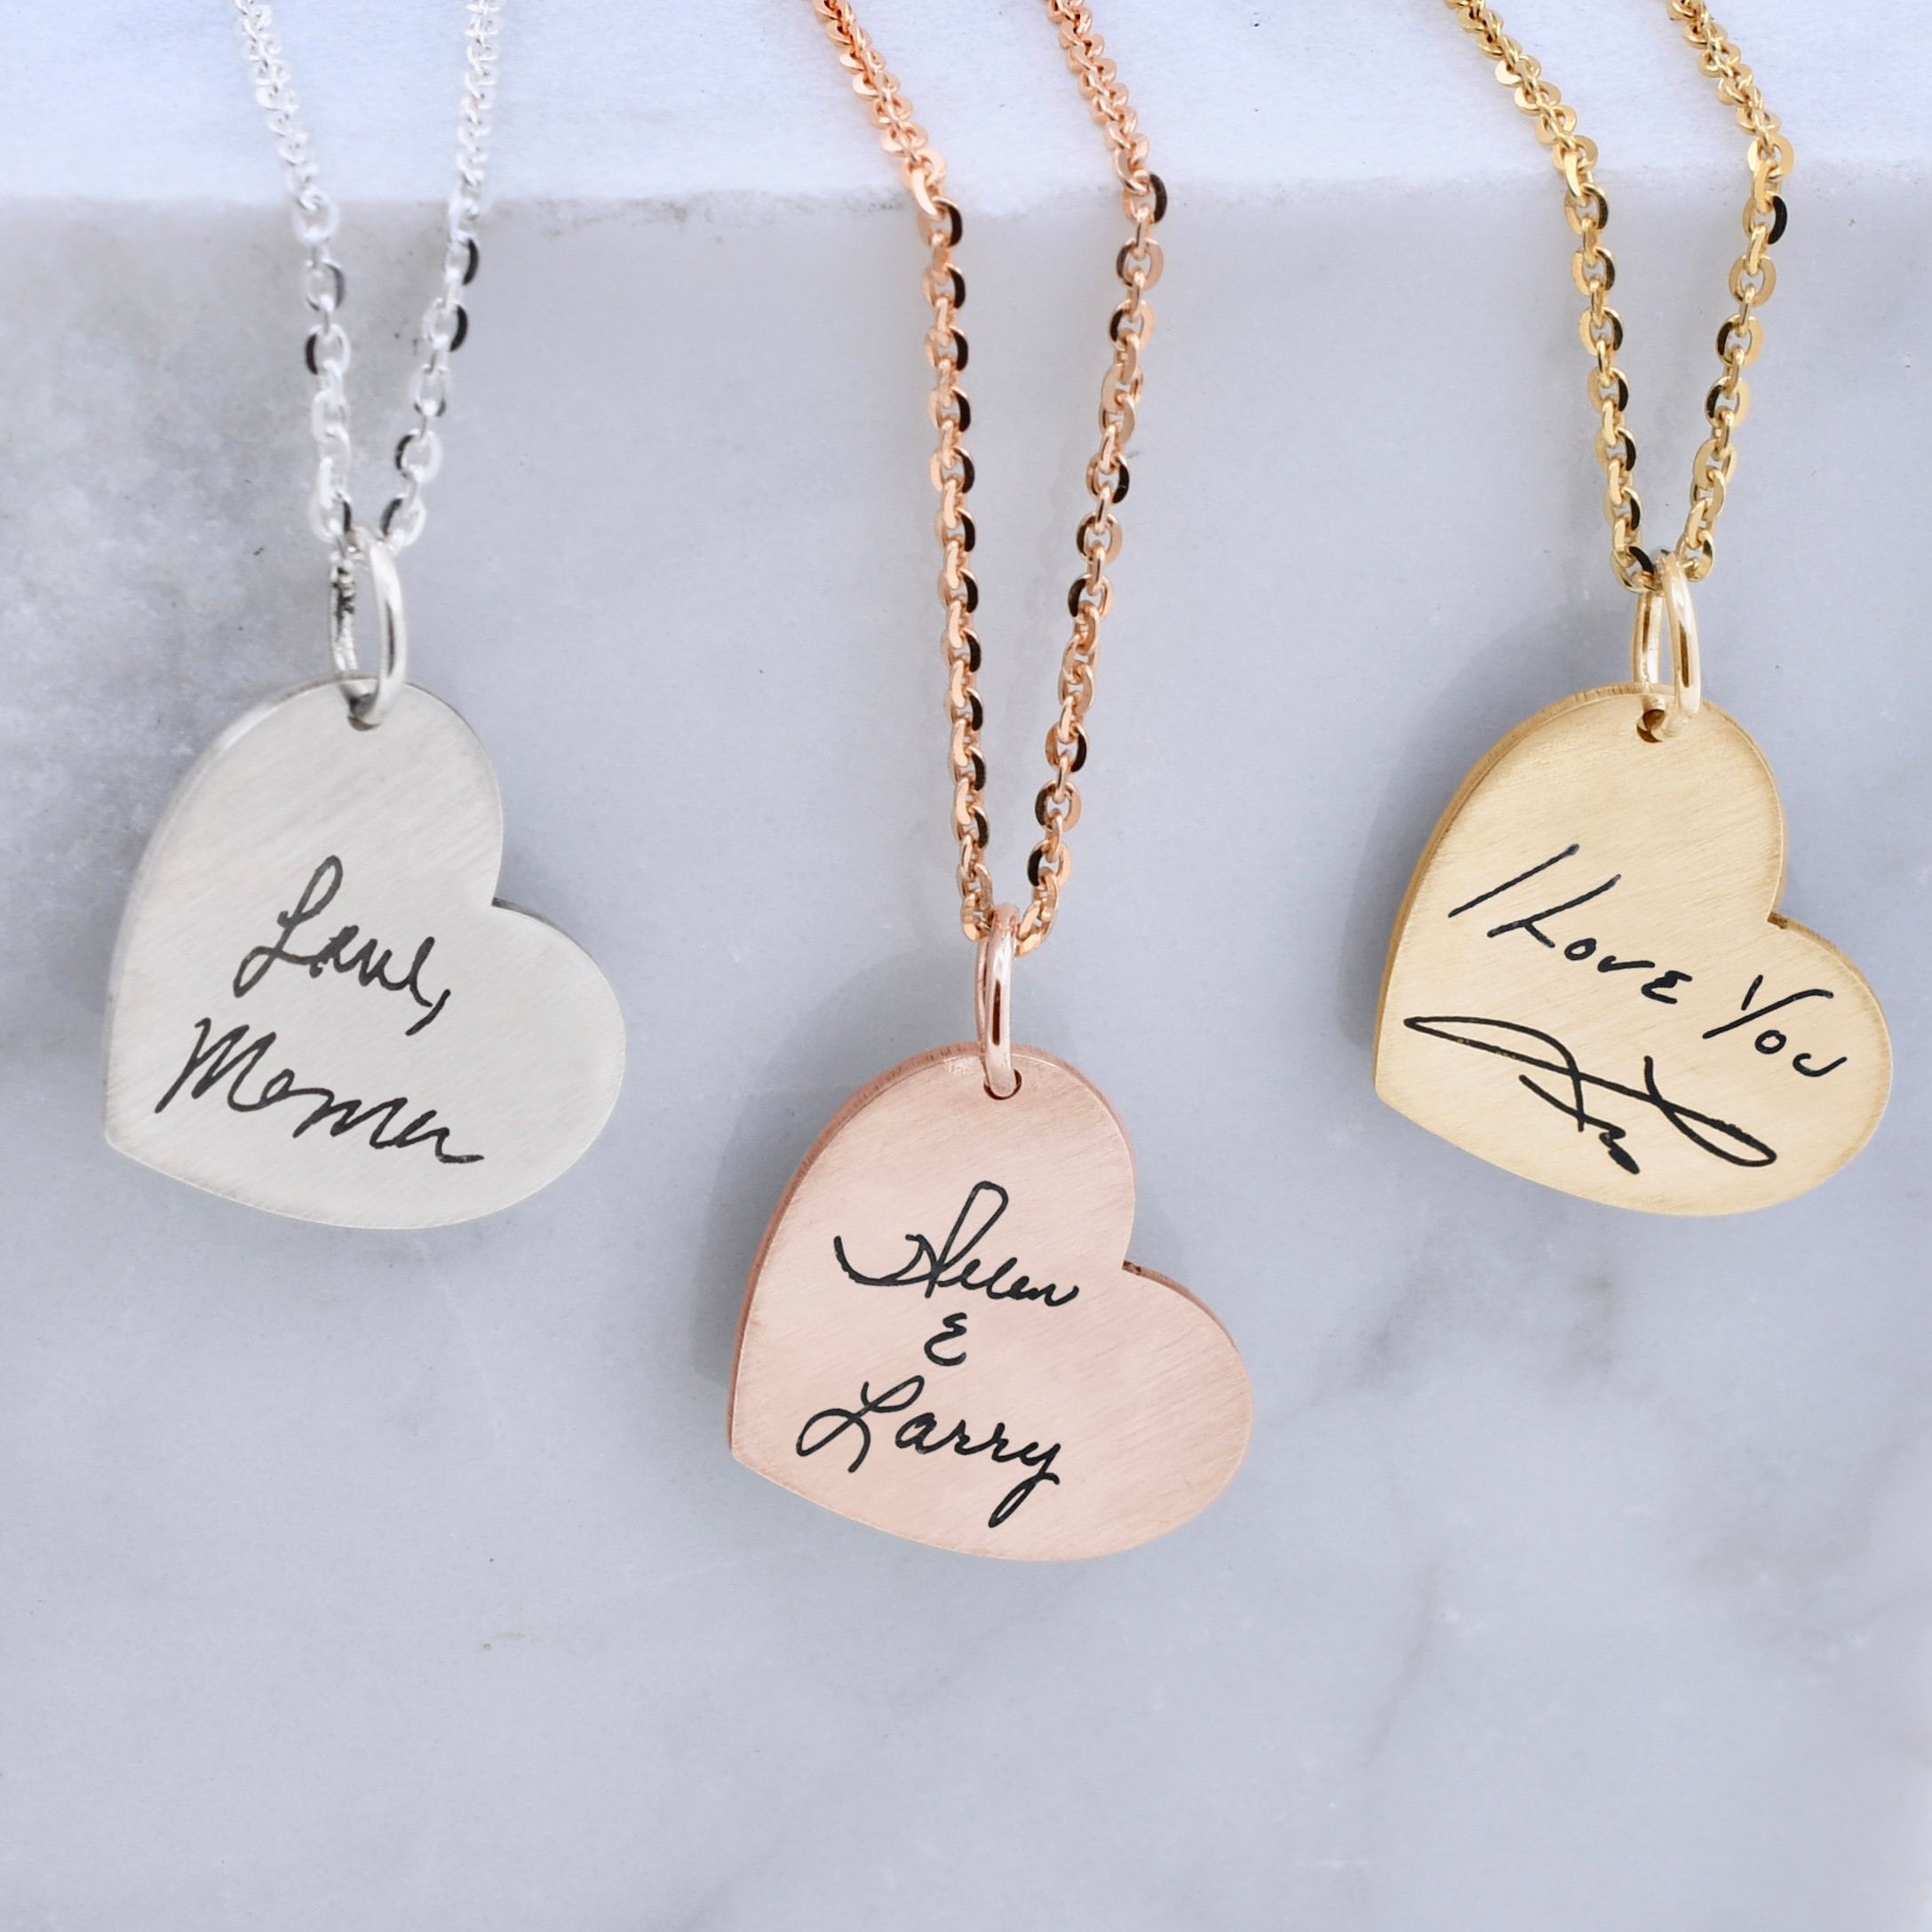 Your own or a loved ones actual handwriting custom engraved pendant necklace  - 14k gold fill personalized memorial heirloom keepsake